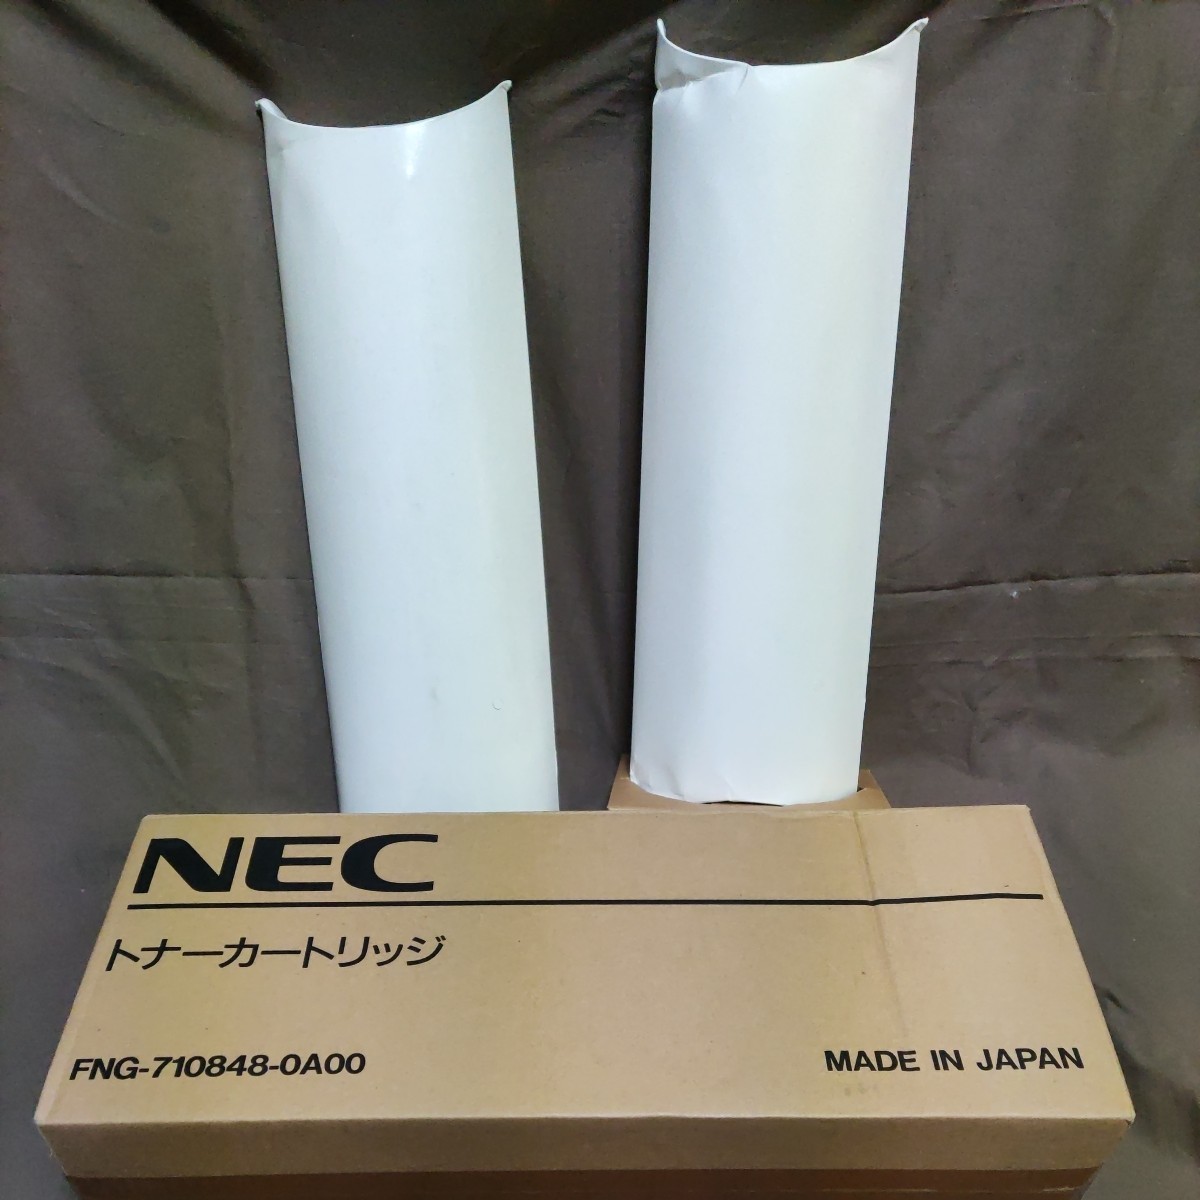 NEC　FNG　71848 トナー2本セット　新品未使用品